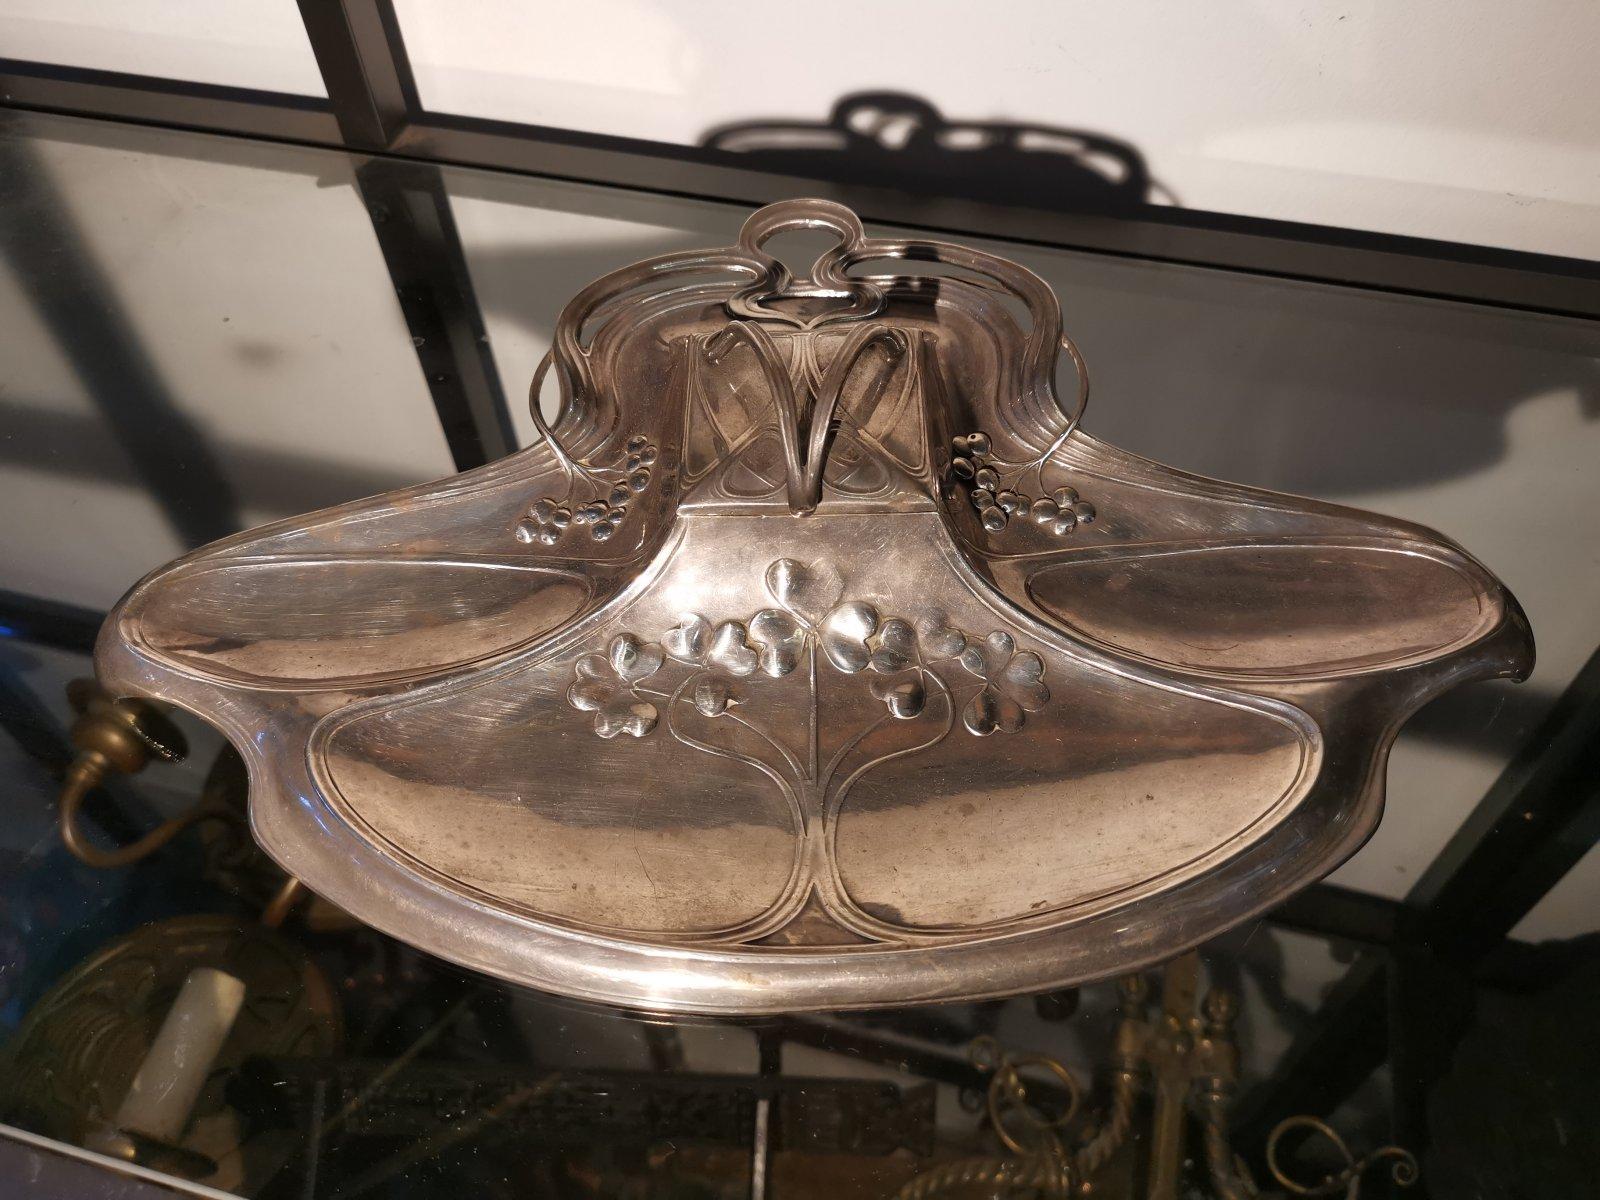 German WMF Secessionist Art Nouveau Pewter Inkstand of Rectangular Organic Flowing Form For Sale